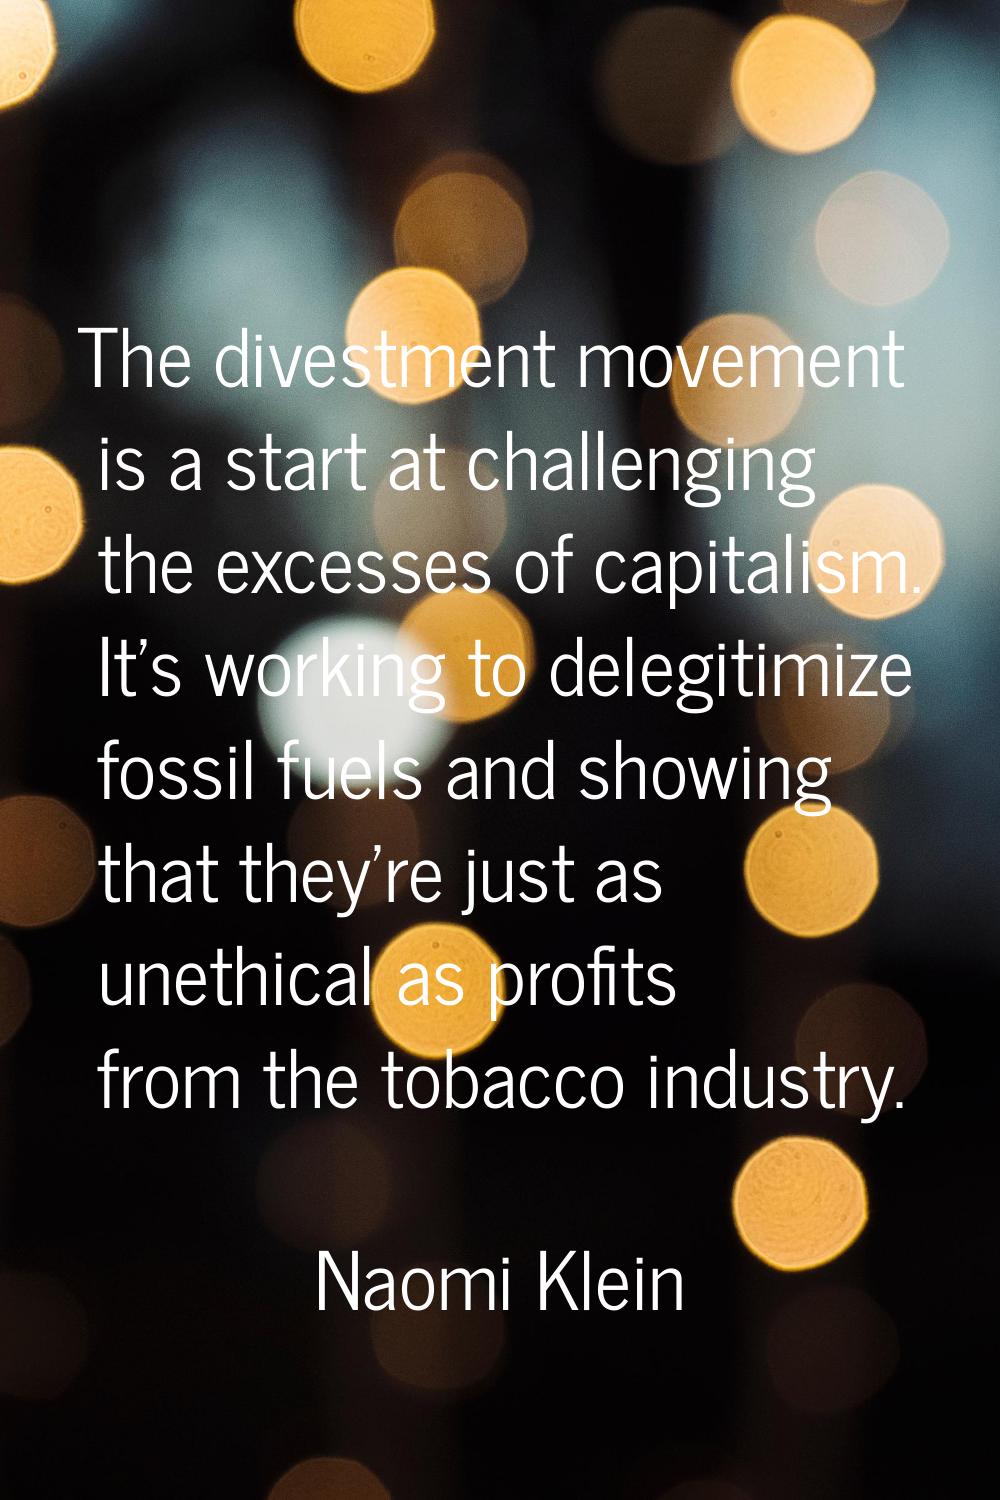 The divestment movement is a start at challenging the excesses of capitalism. It's working to deleg